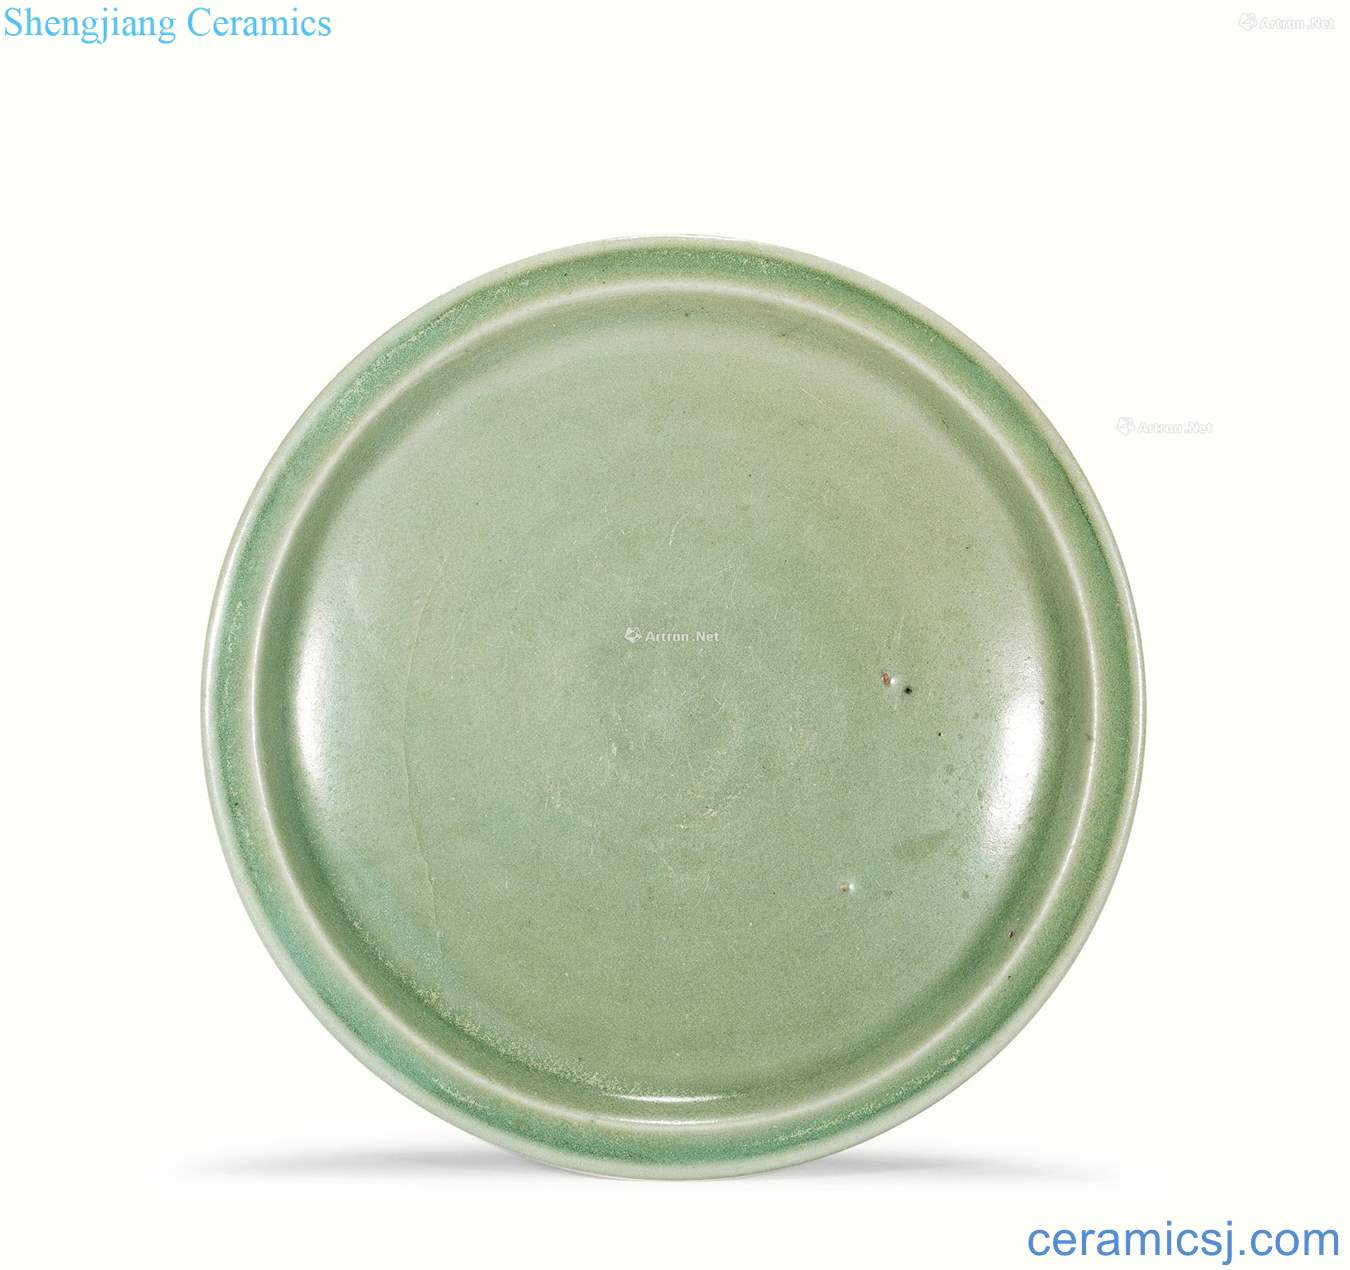 And the early yuan dynasty Longquan green glaze shallow dish